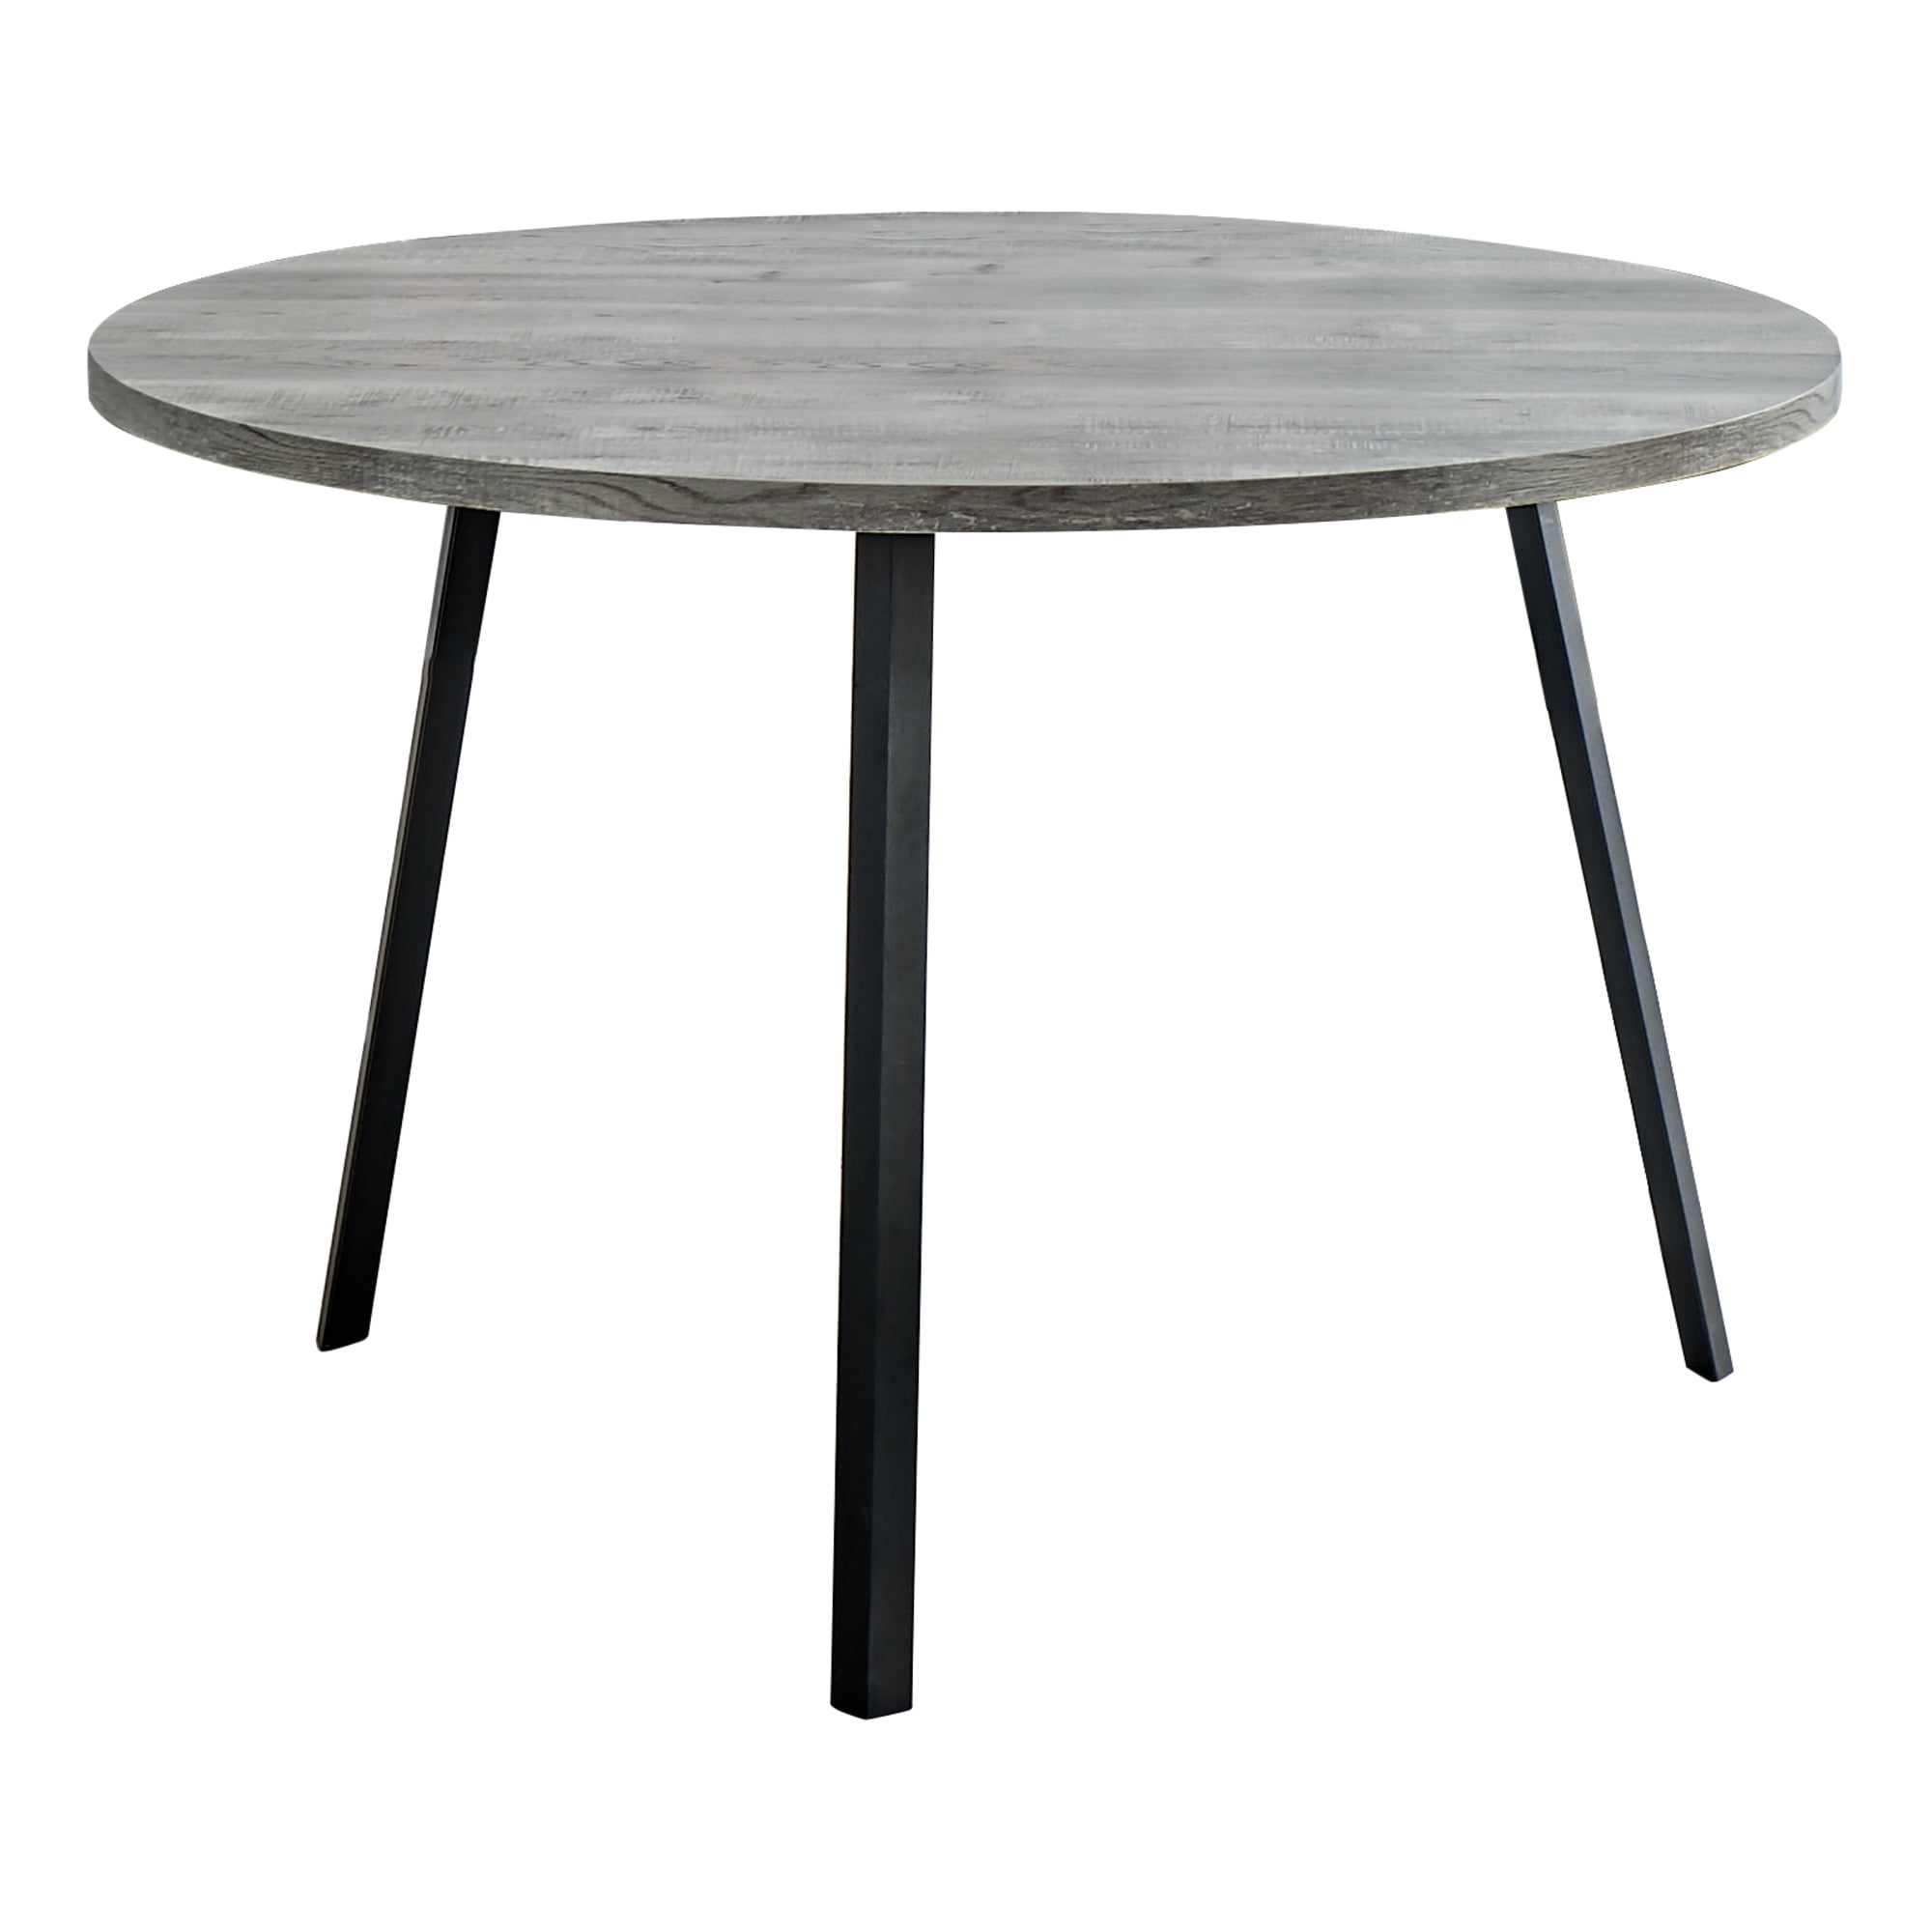 Offex 48"L Modern Round Dining Table with Black Angled Metal Legs